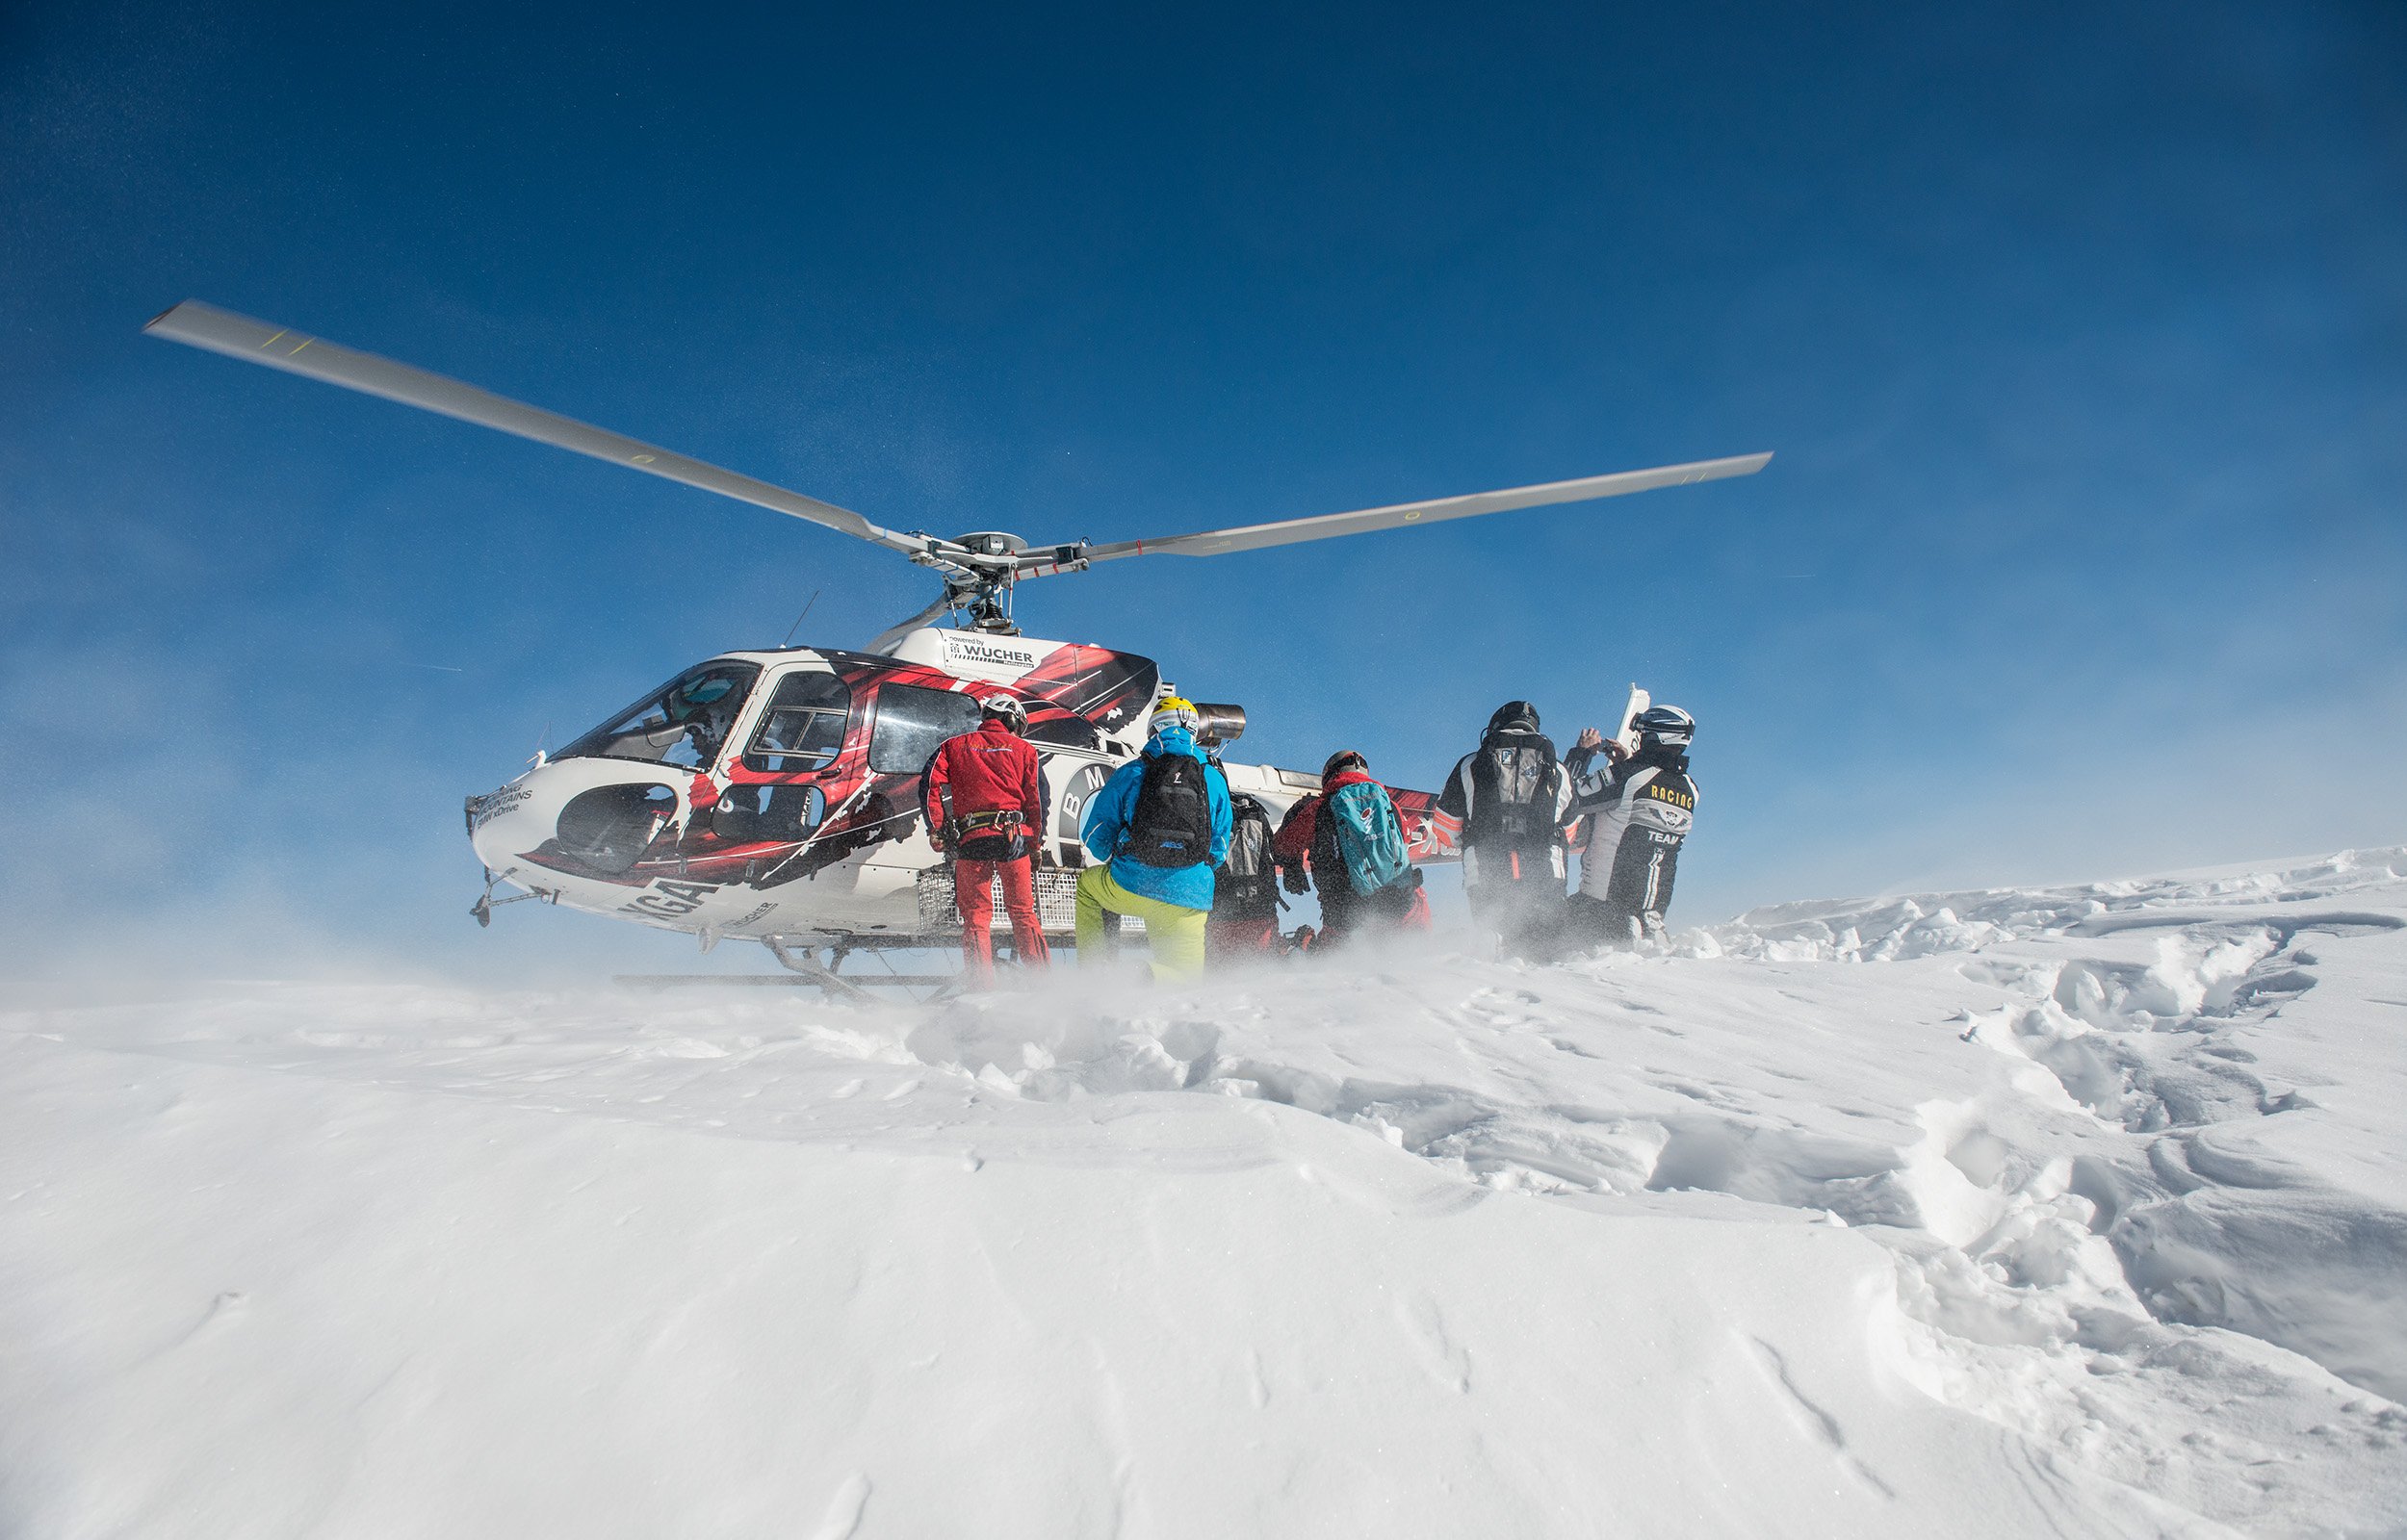 Sign up for guided heli skiing trips for beginners and experienced heliskiers